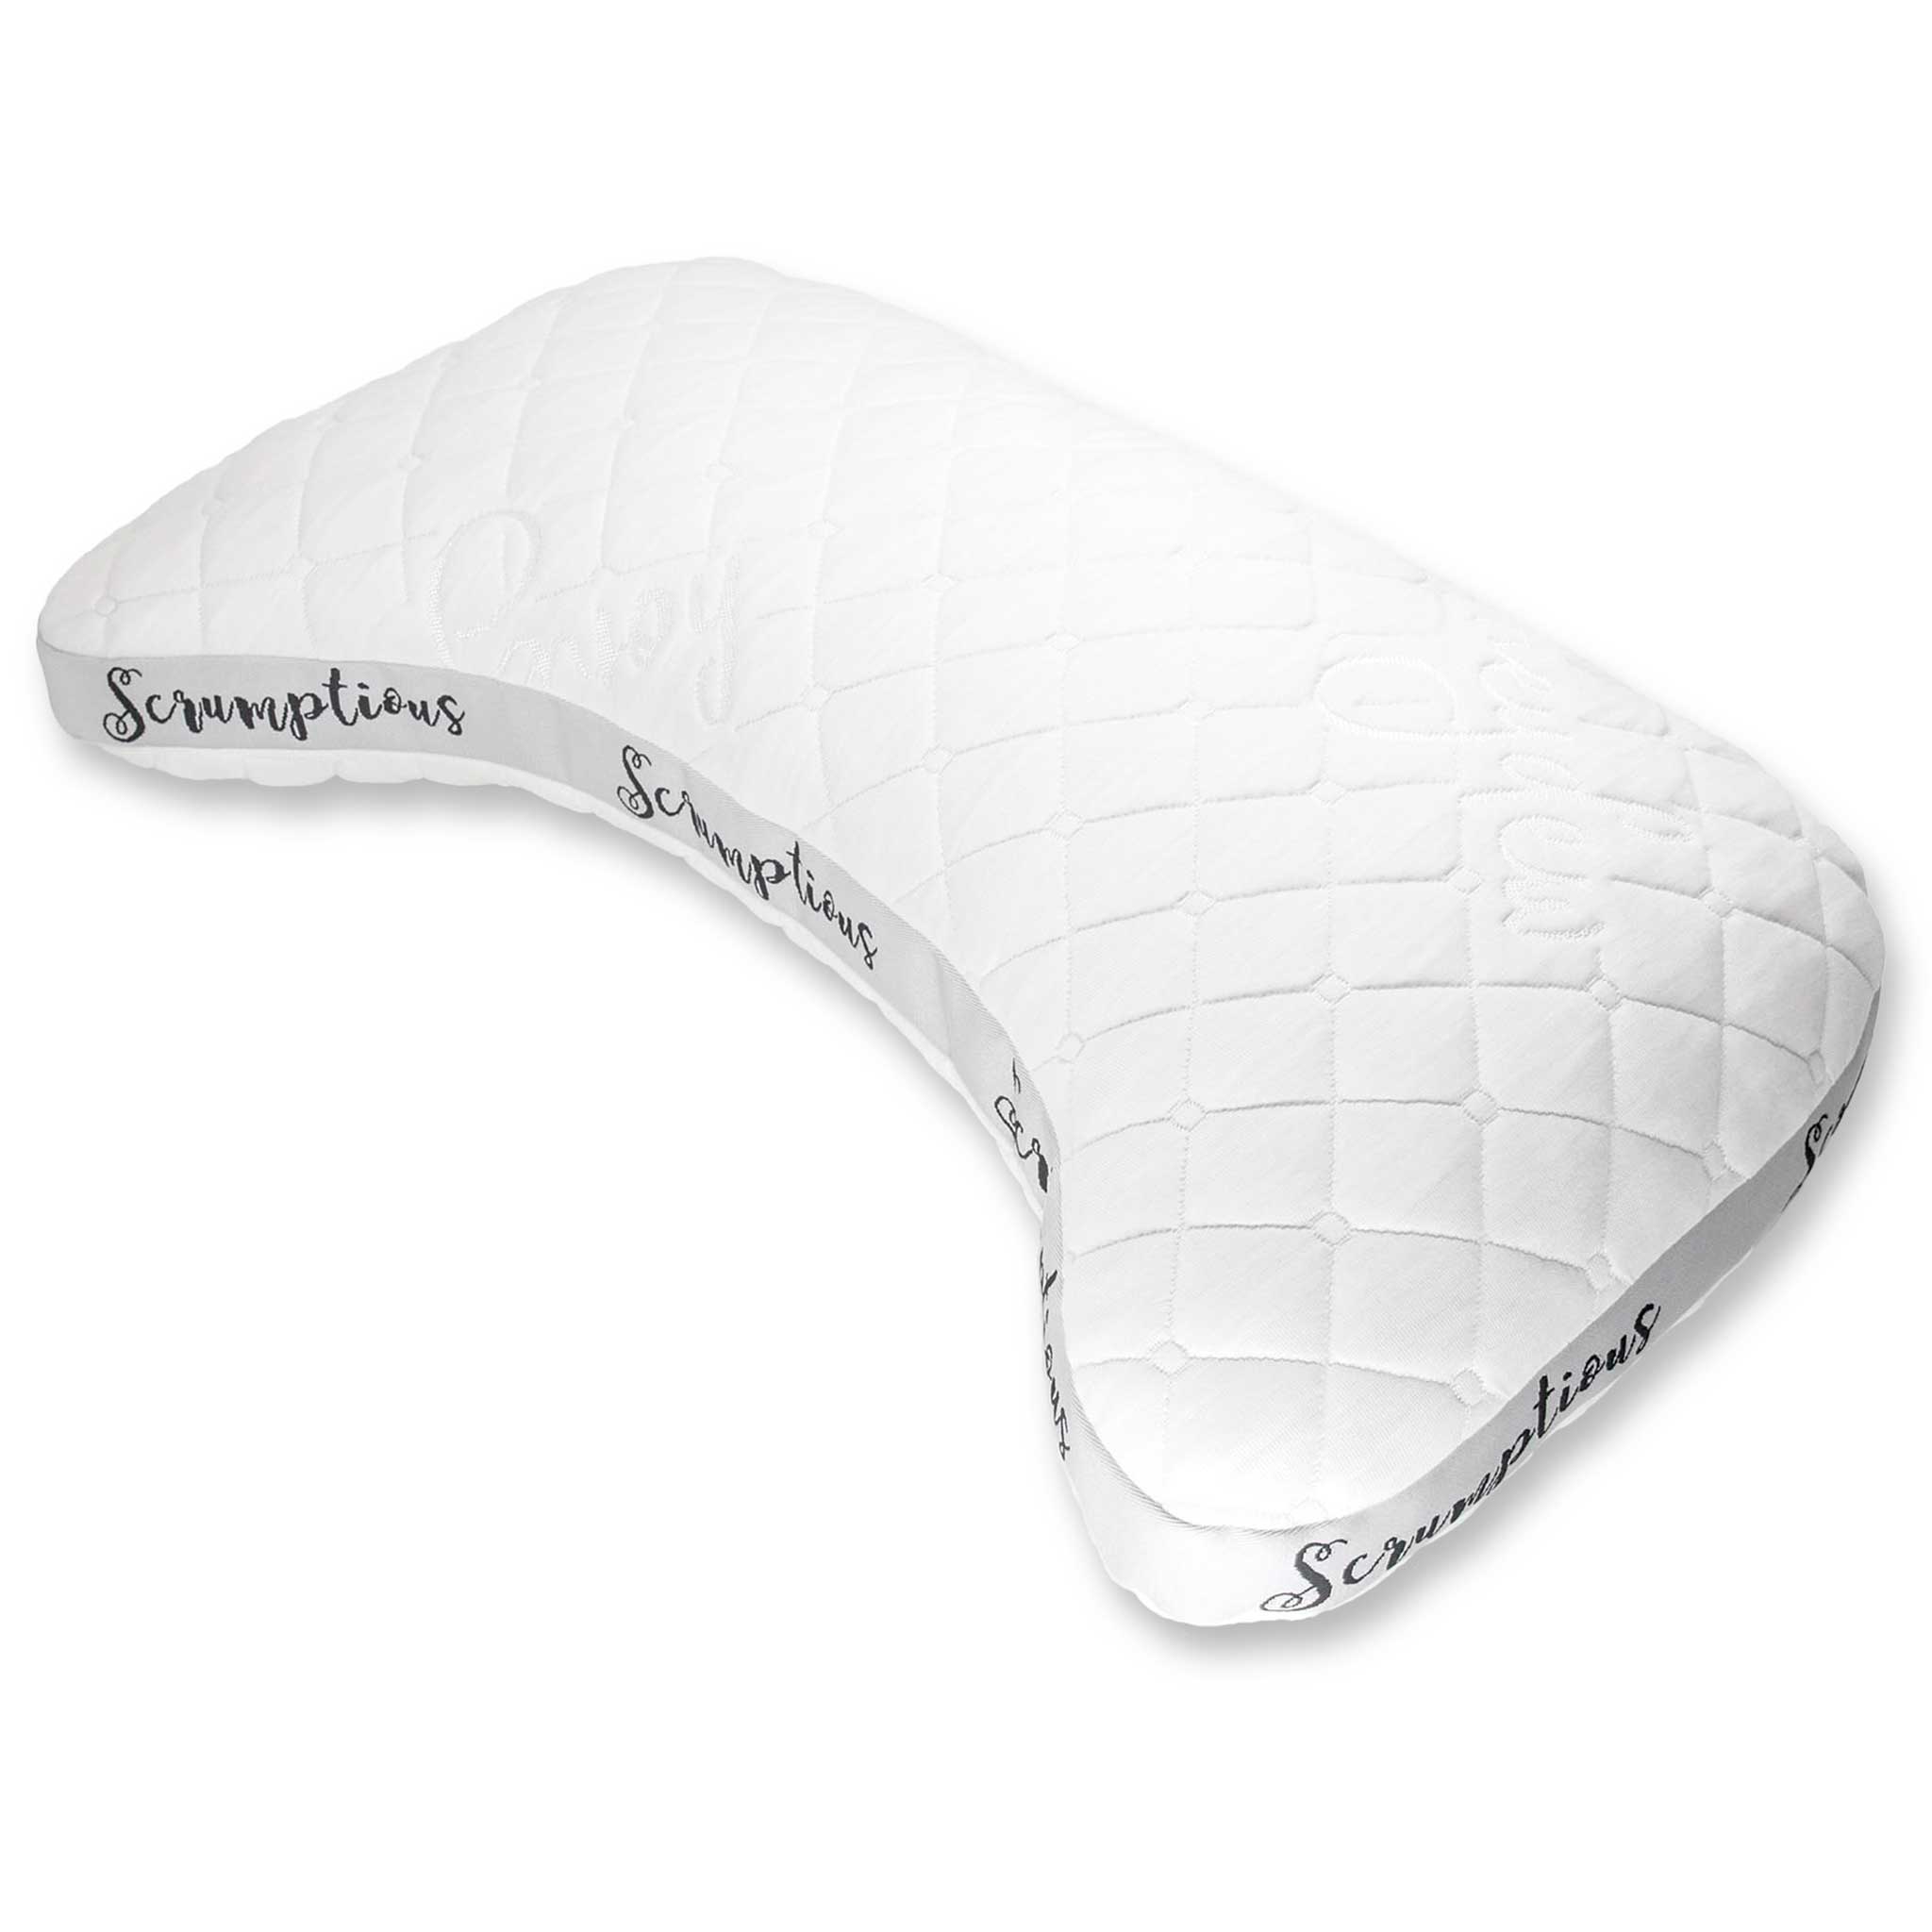 The Scrumptious Side Pillow